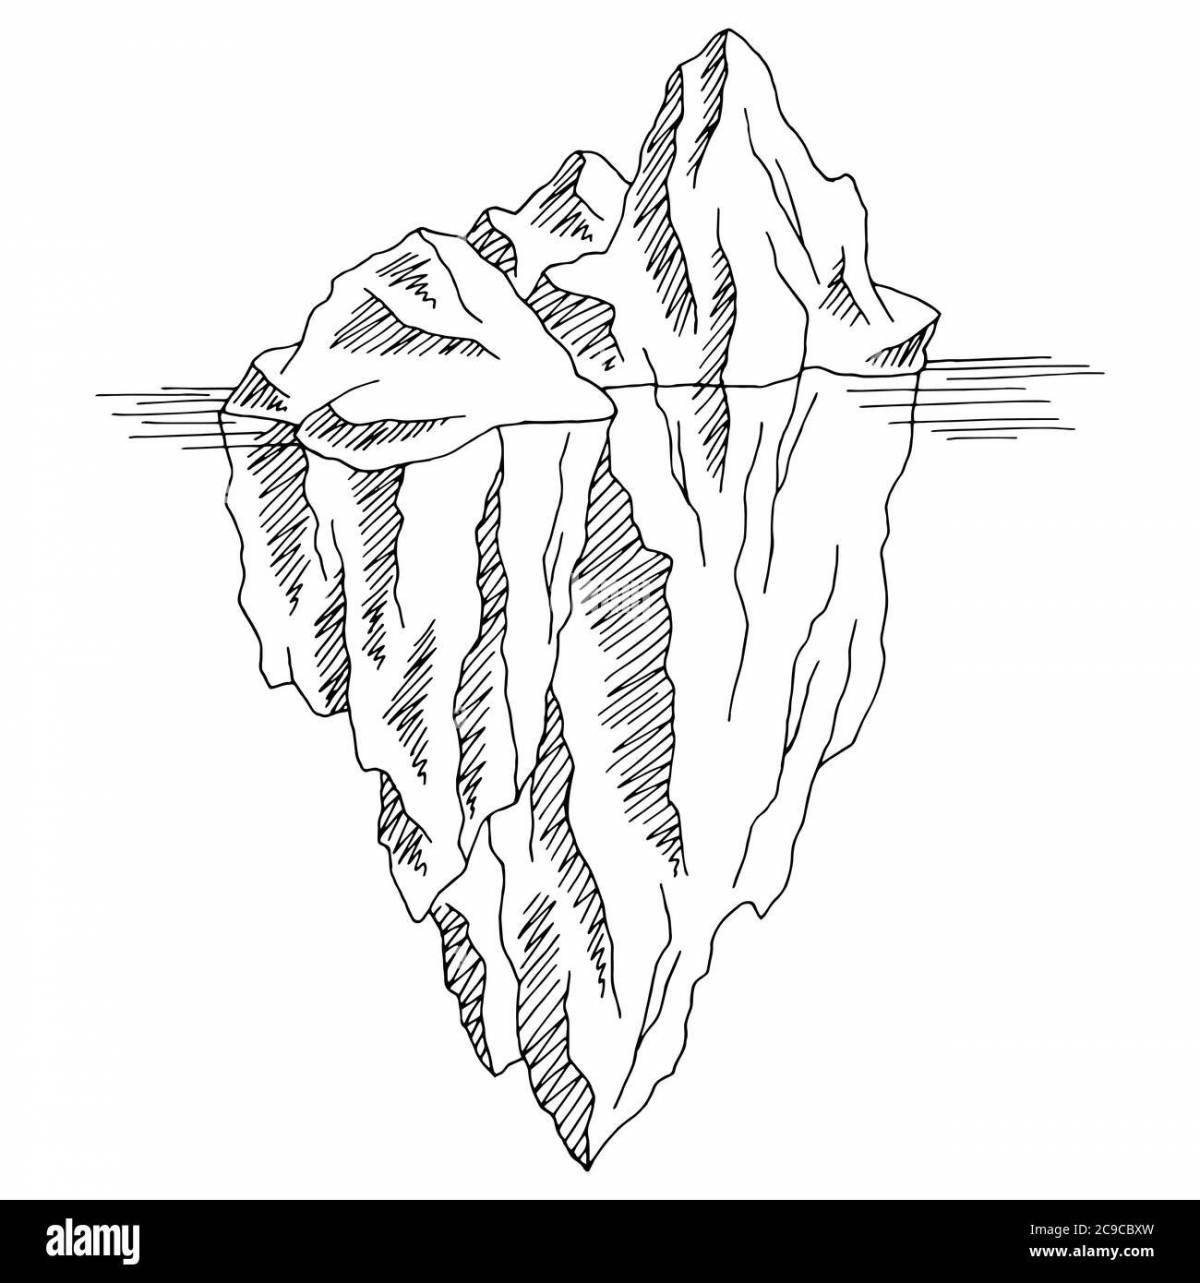 Colourful iceberg coloring book for kids